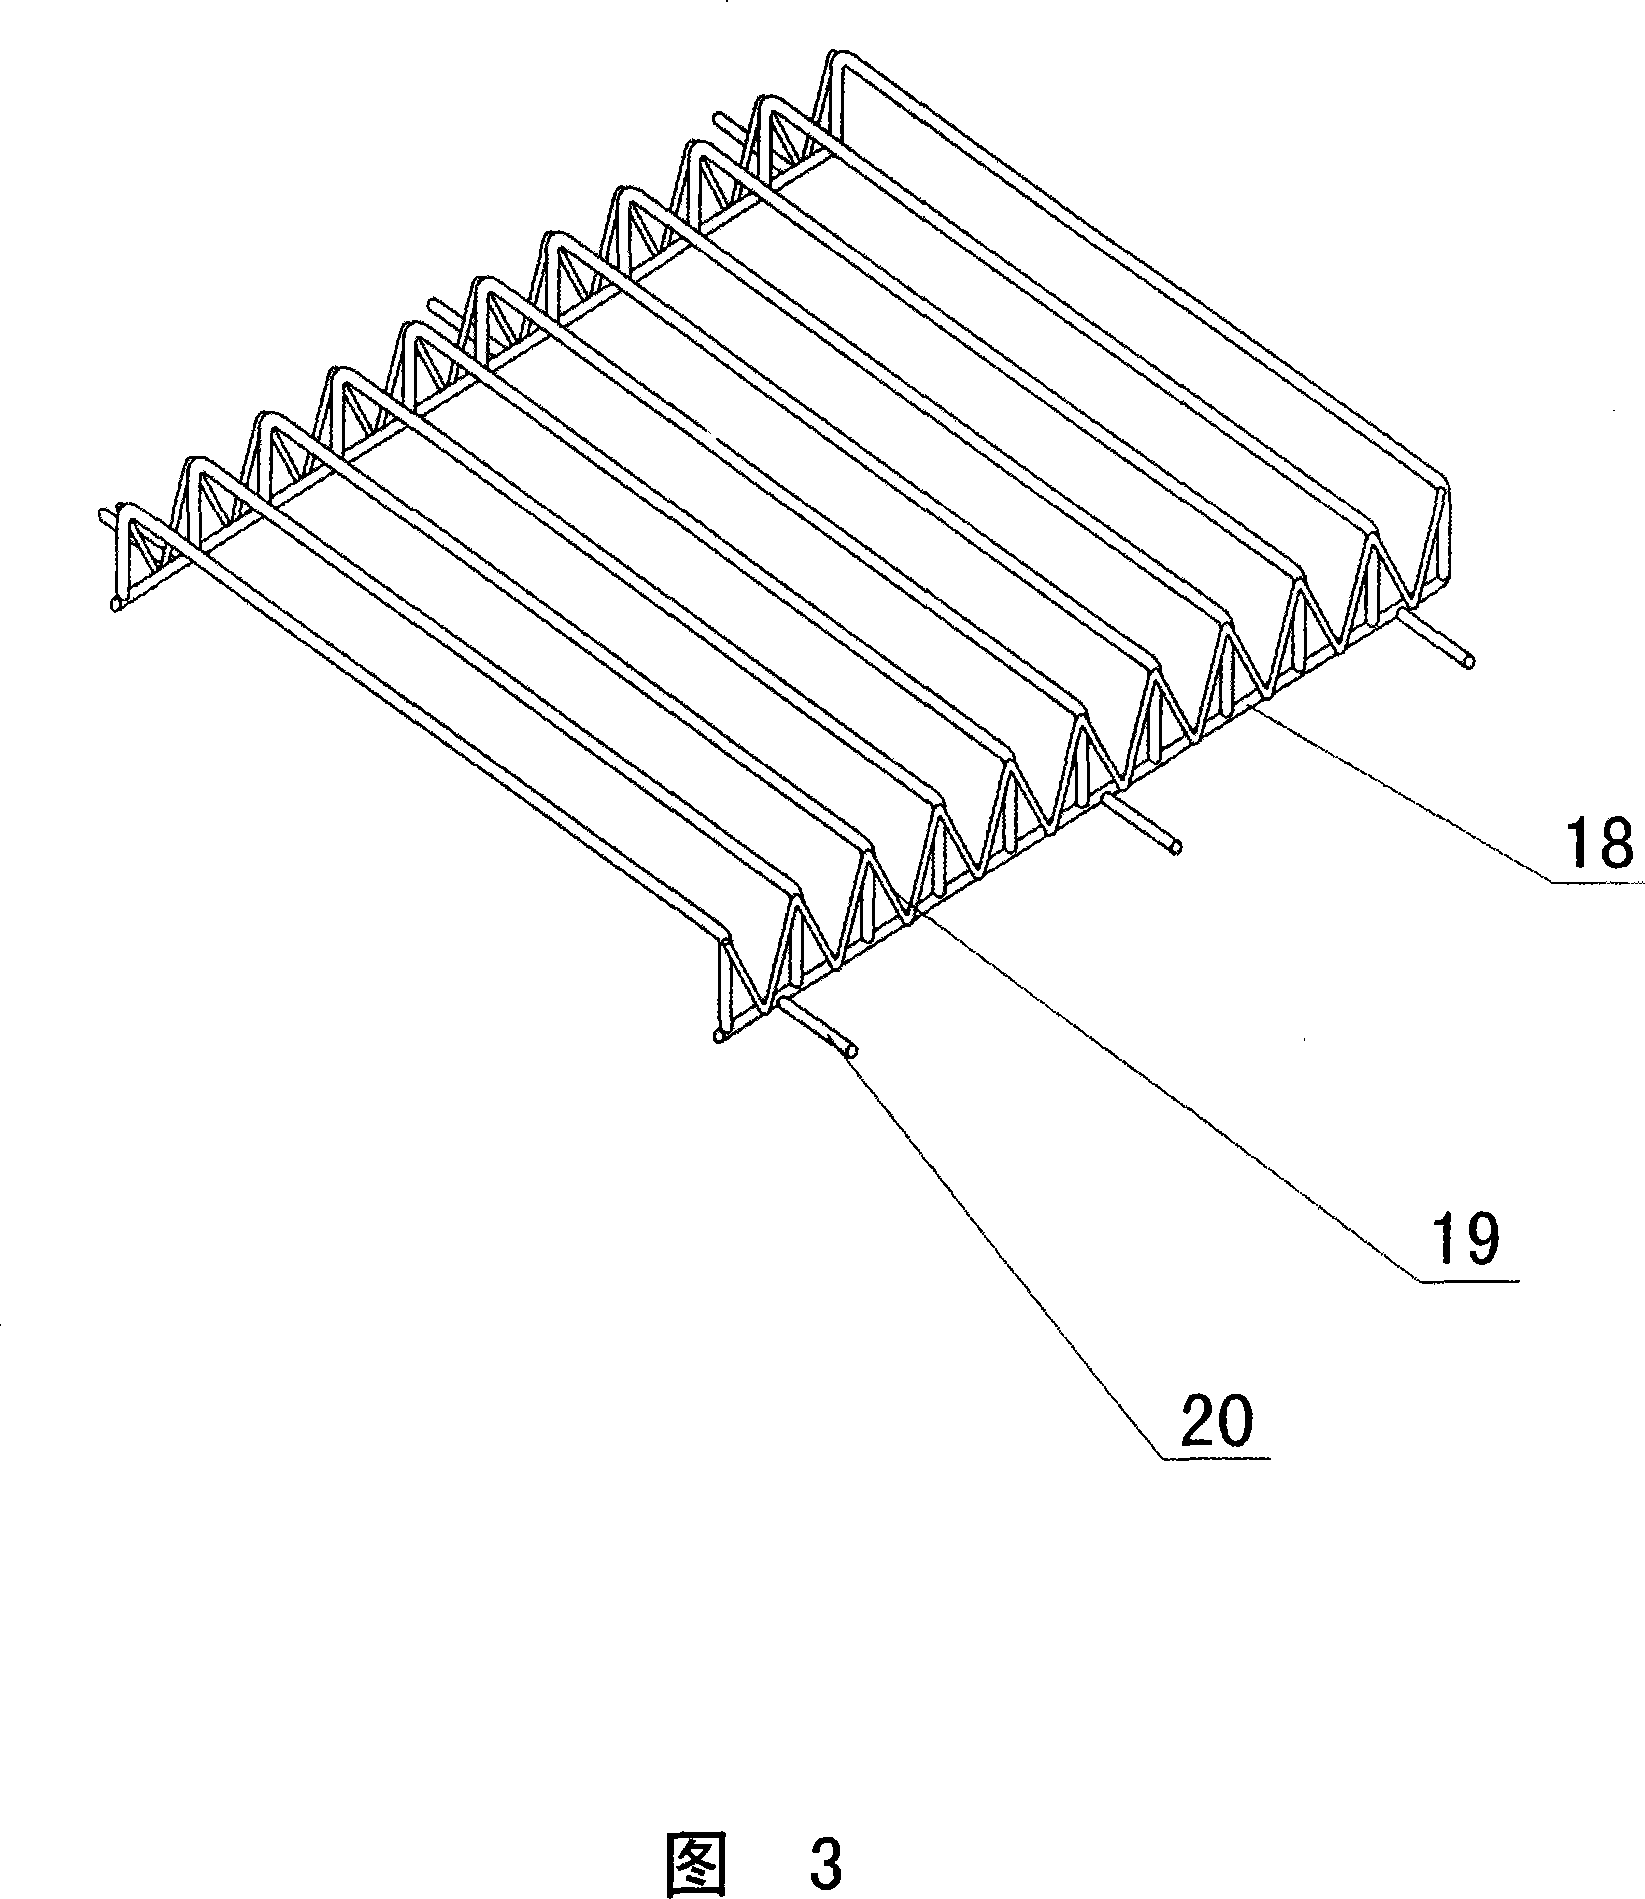 Method and apparatus for spread-planting and maintaining artificial grassplot